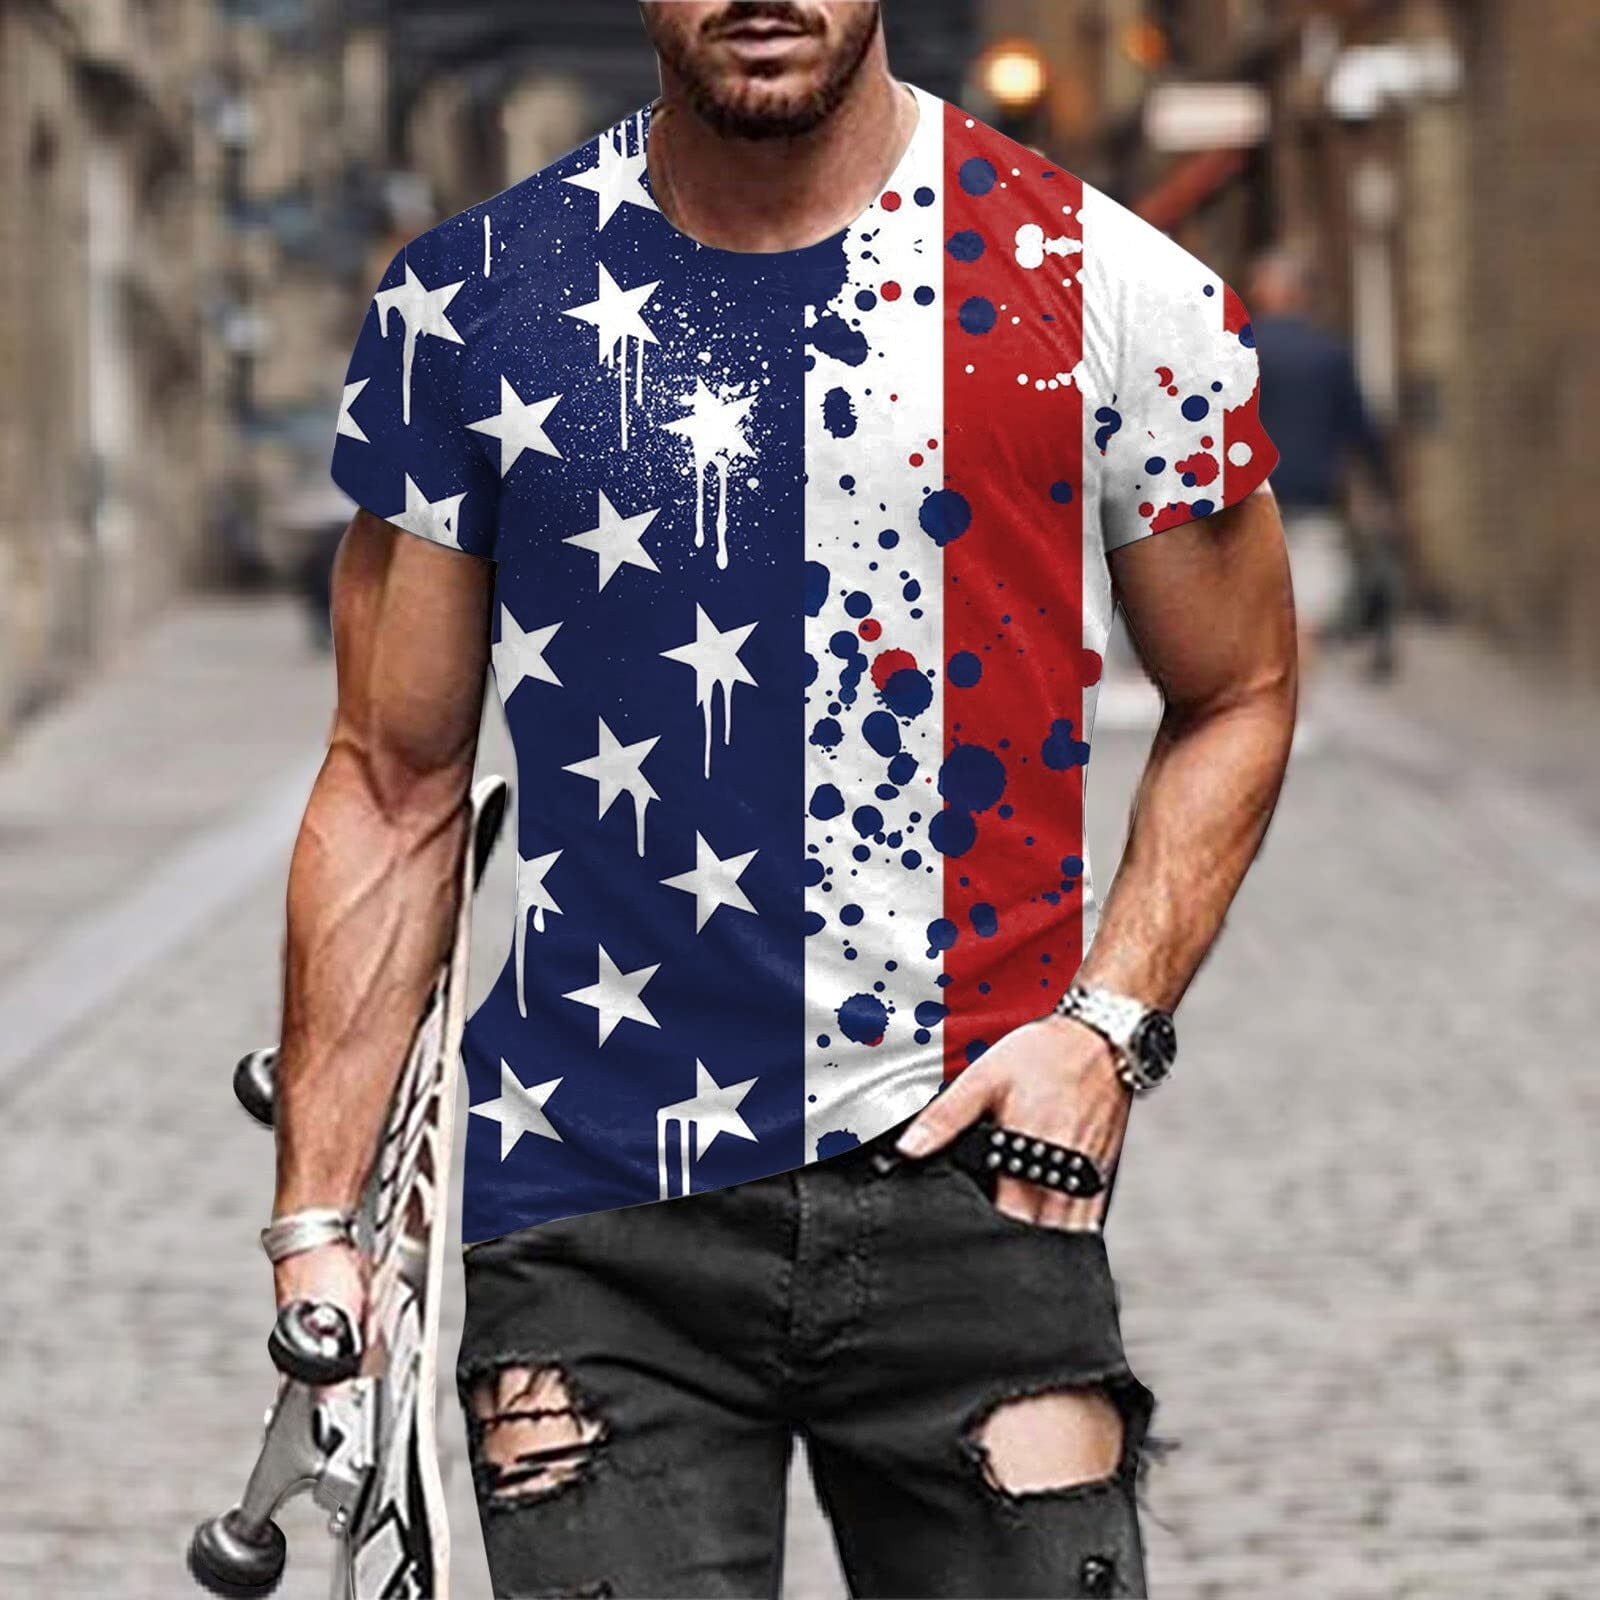 pafei tyugd Vintage American Flag Shirts for Men 4th of July Patriotic Graphic Tee Shirt Independence Day Short Sleeve T-Shirt, Men's, Size: Mens Tops